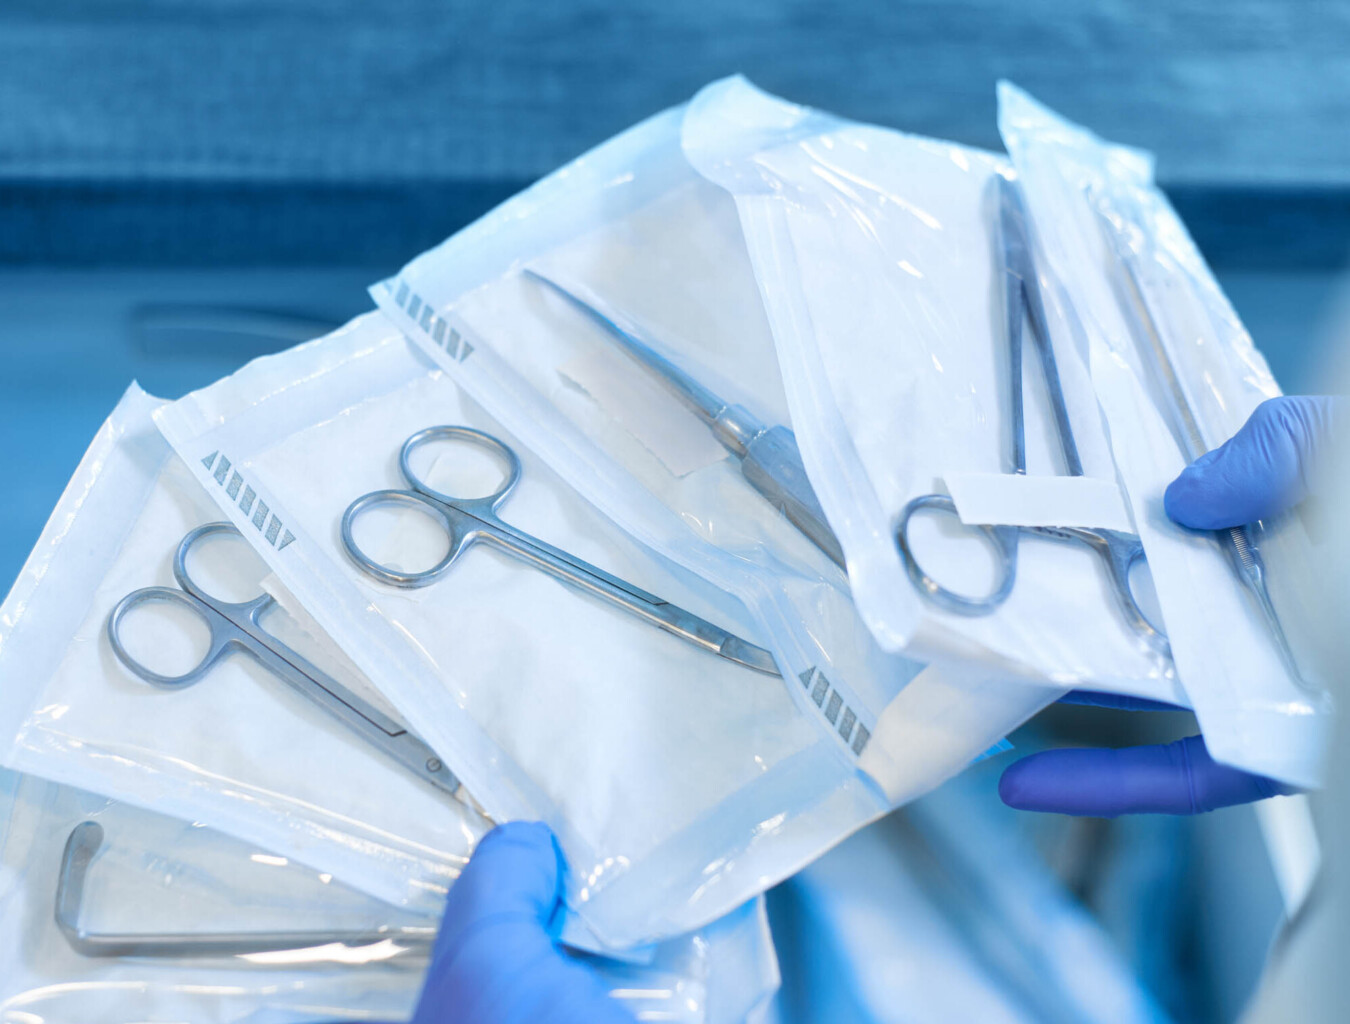 A person is holding a pair of surgical tools in packaging.